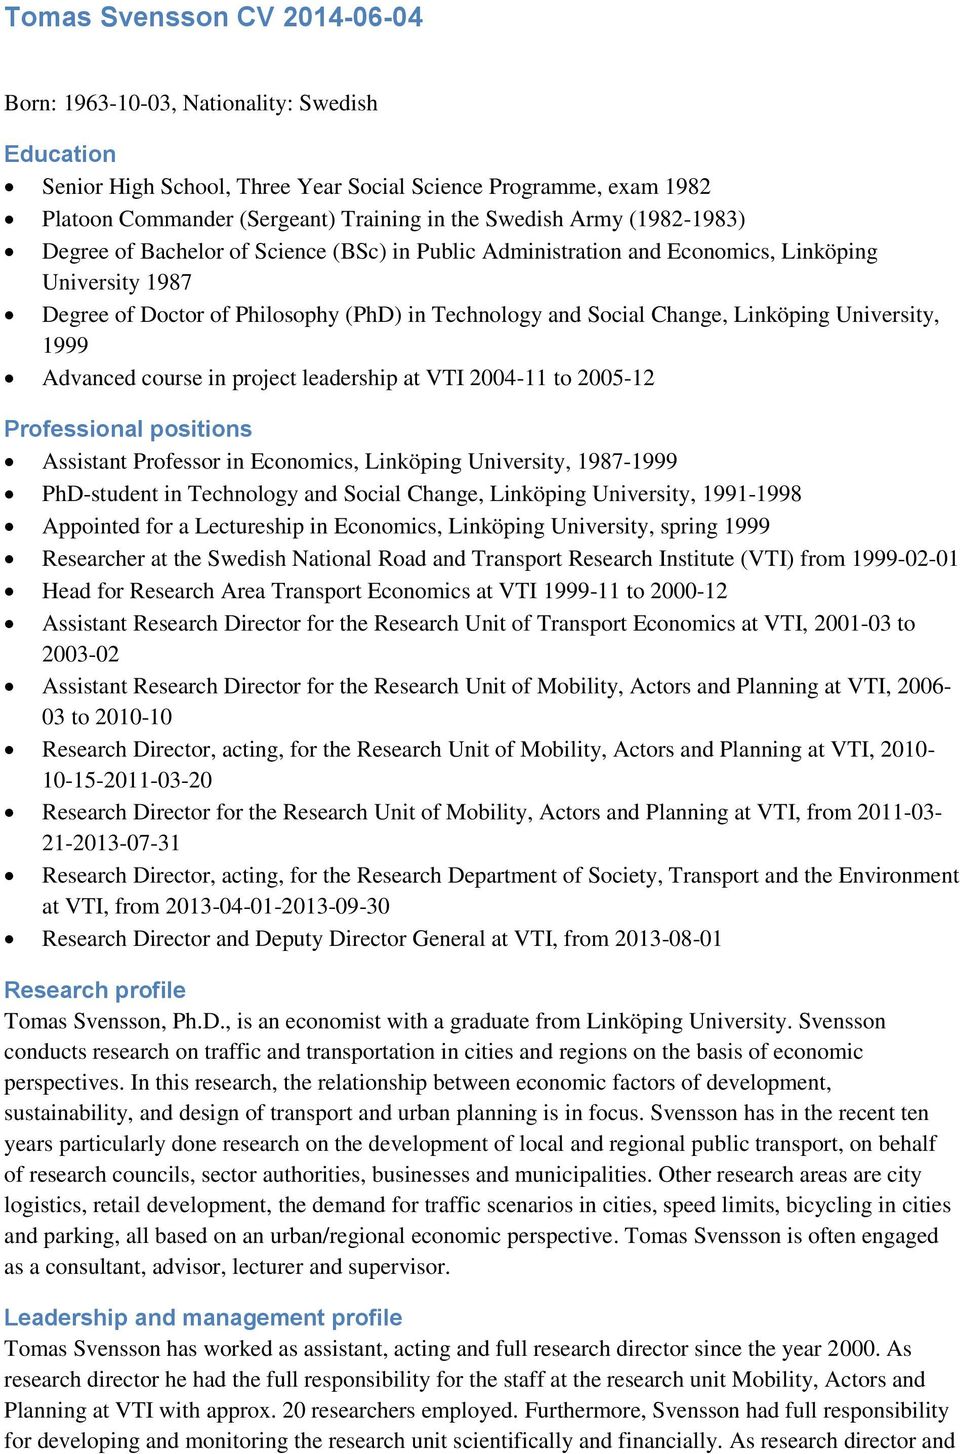 Advanced course in project leadership at VTI 2004-11 to 2005-12 Professional positions Assistant Professor in Economics, University, 1987-1999 PhD-student in Technology and Social Change, University,